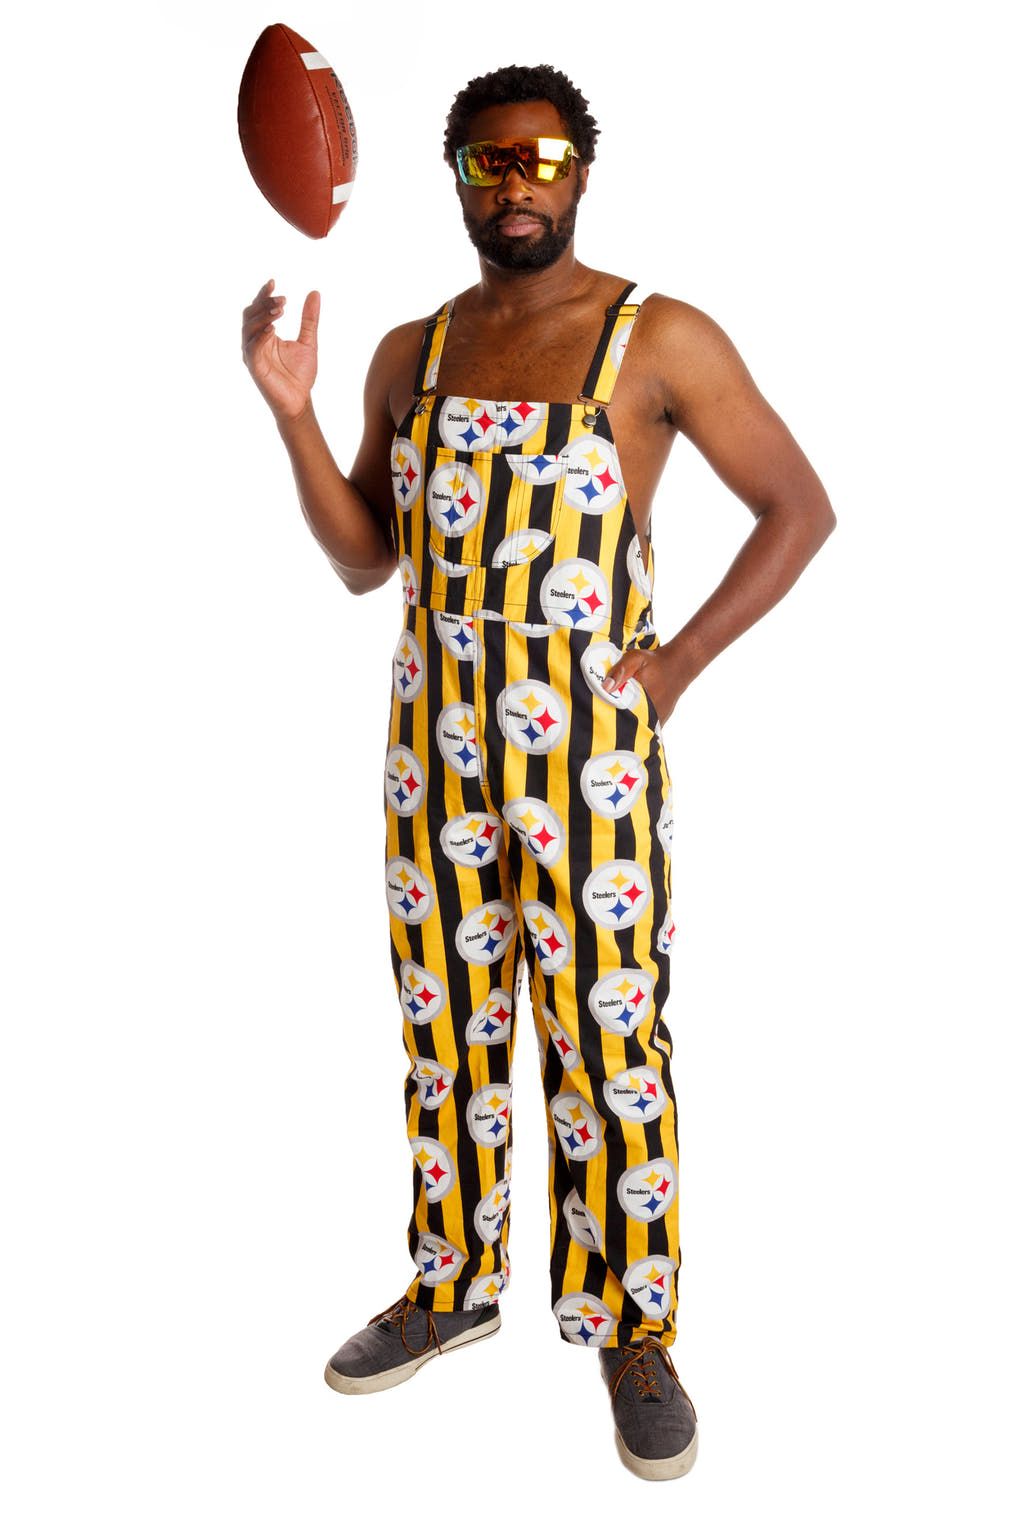 The Pittsburgh Steelers | Unisex NFL Overalls